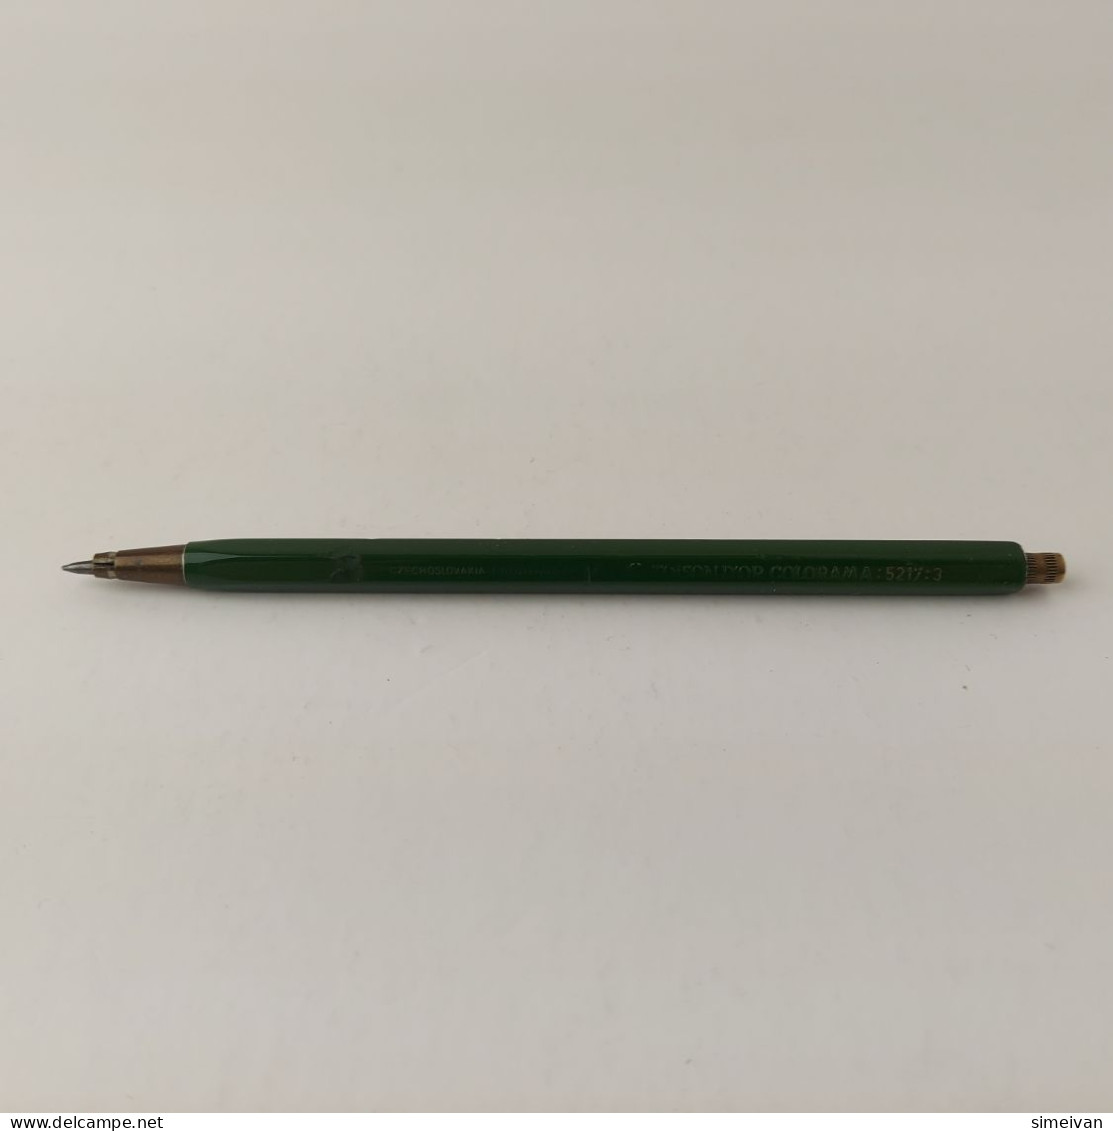 Vintage Mechanical Pencil TOISON D'OR COLORAMA 5217:3 Bohemia Works Green #5492 - Plumes